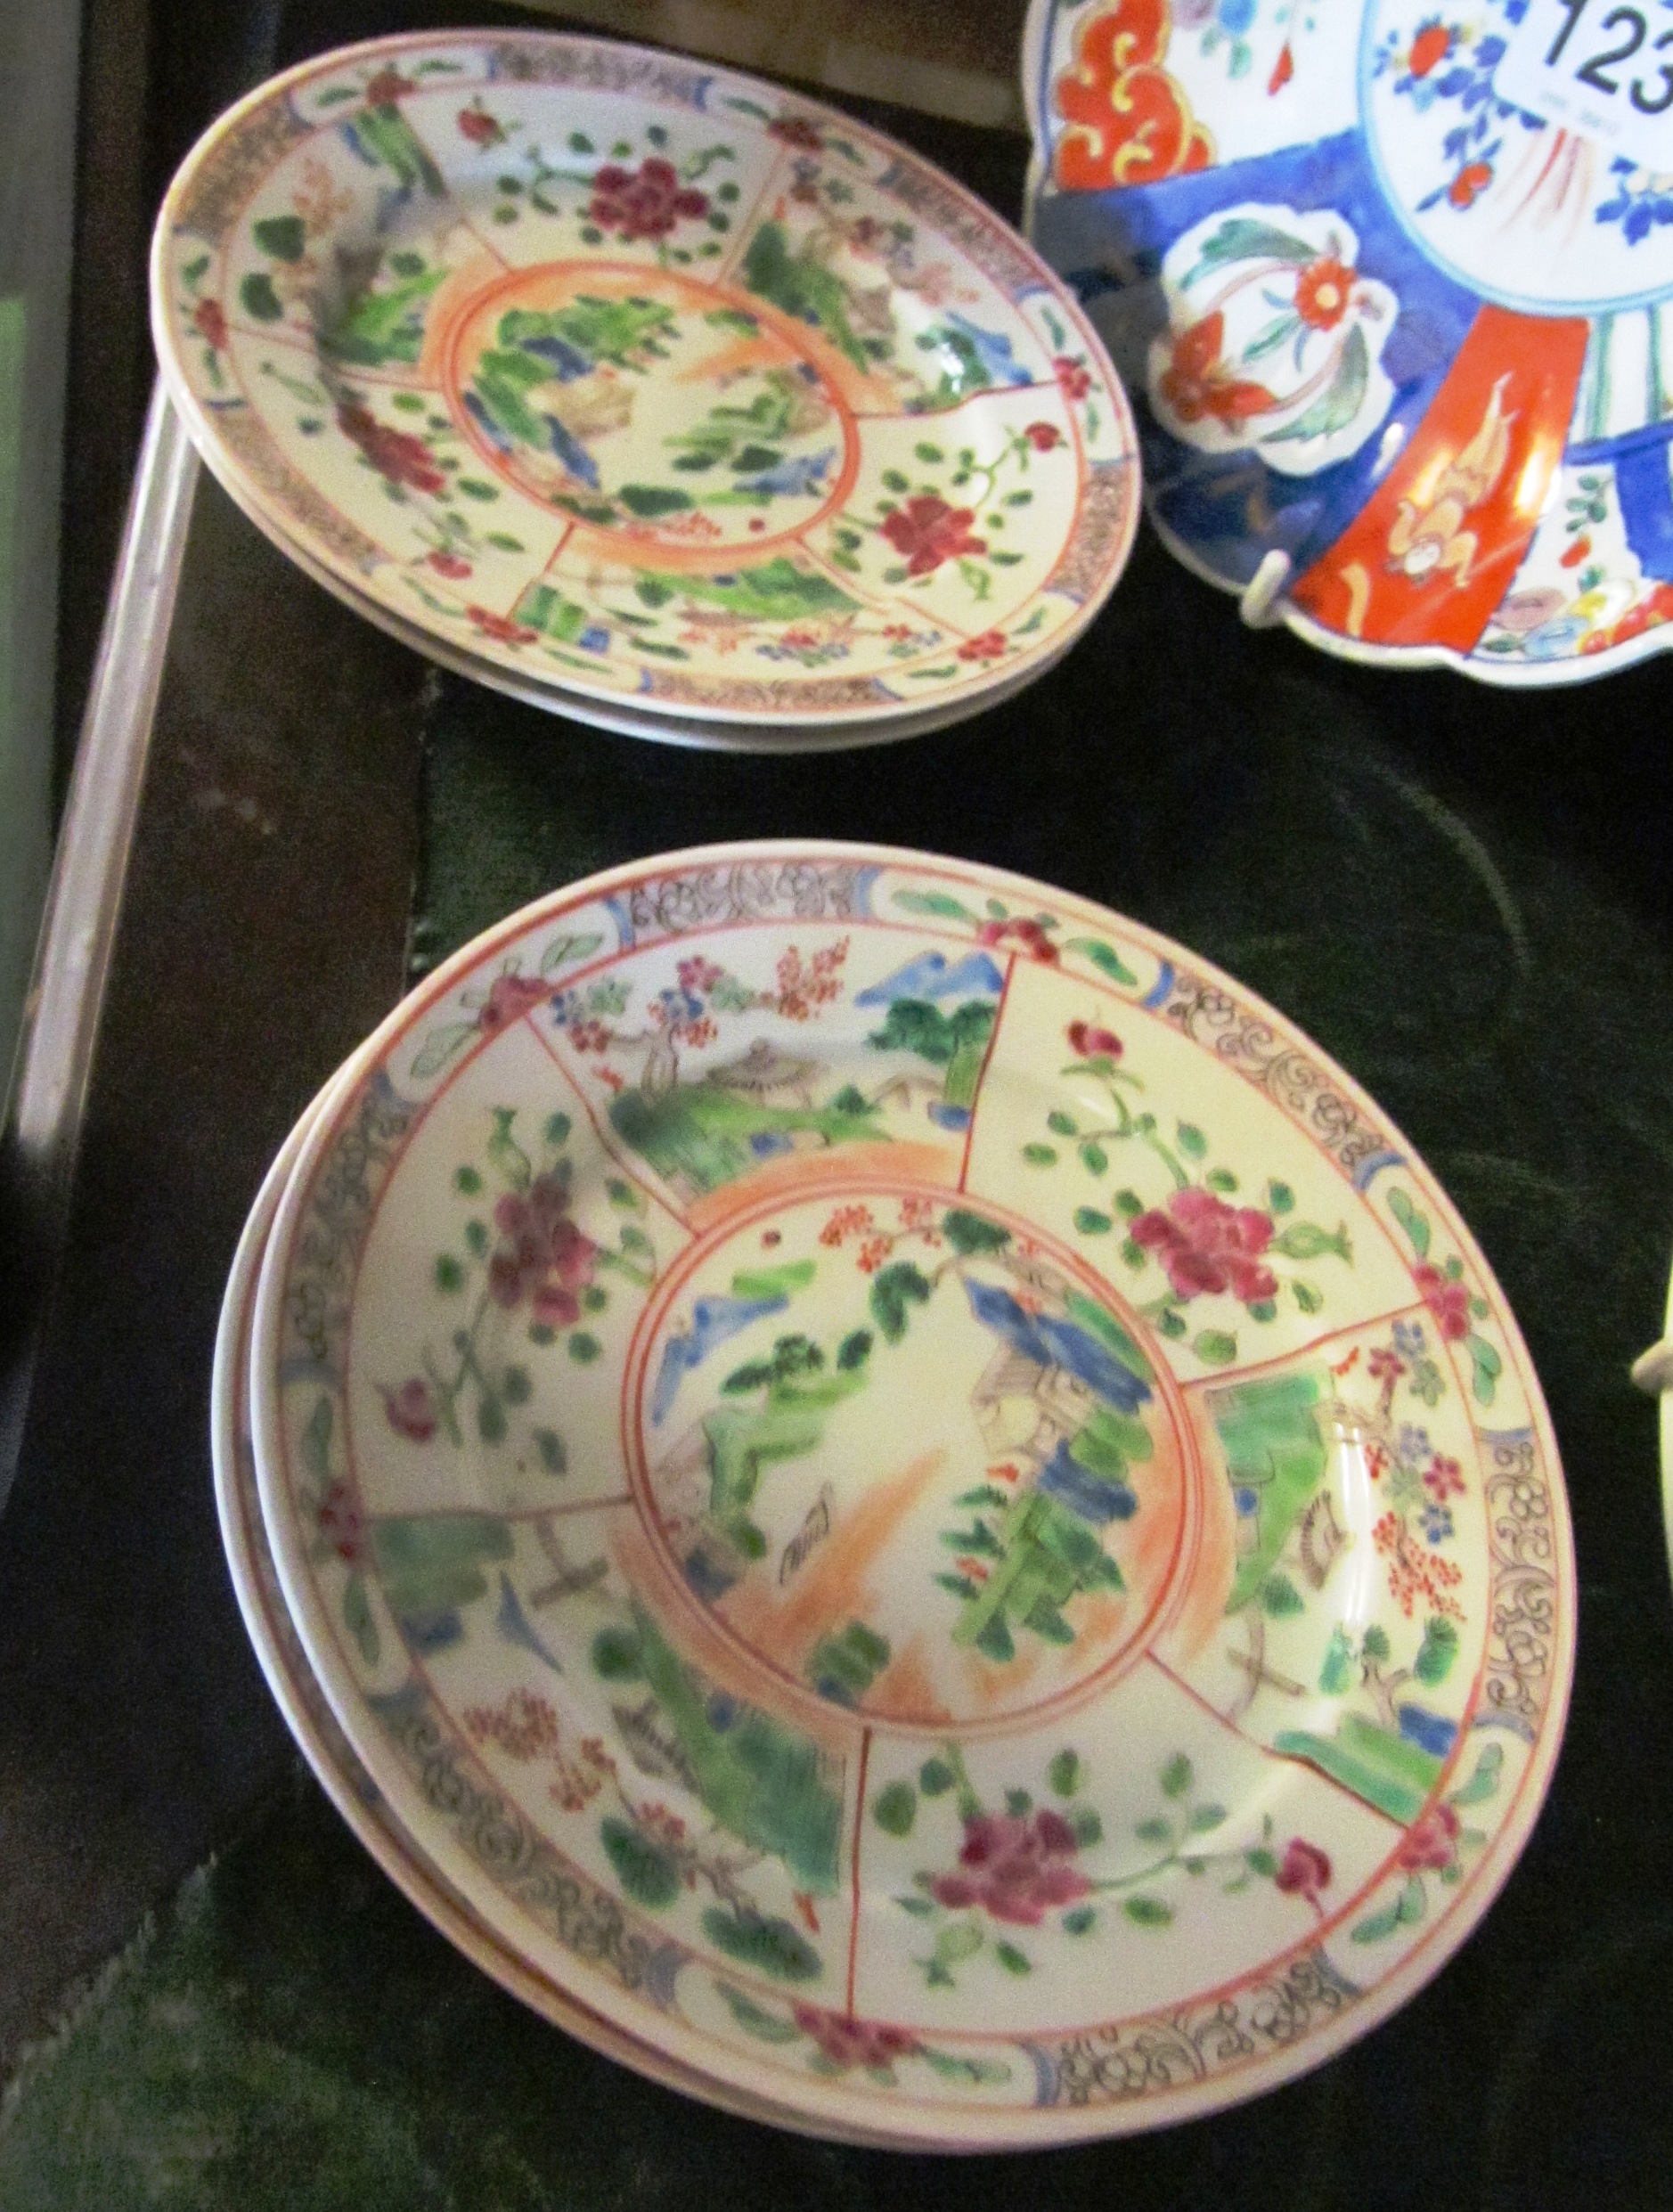 An Imari fluted edge plate and four famille rose side plates, 3 cups,3 saucers an a plate - Image 3 of 3